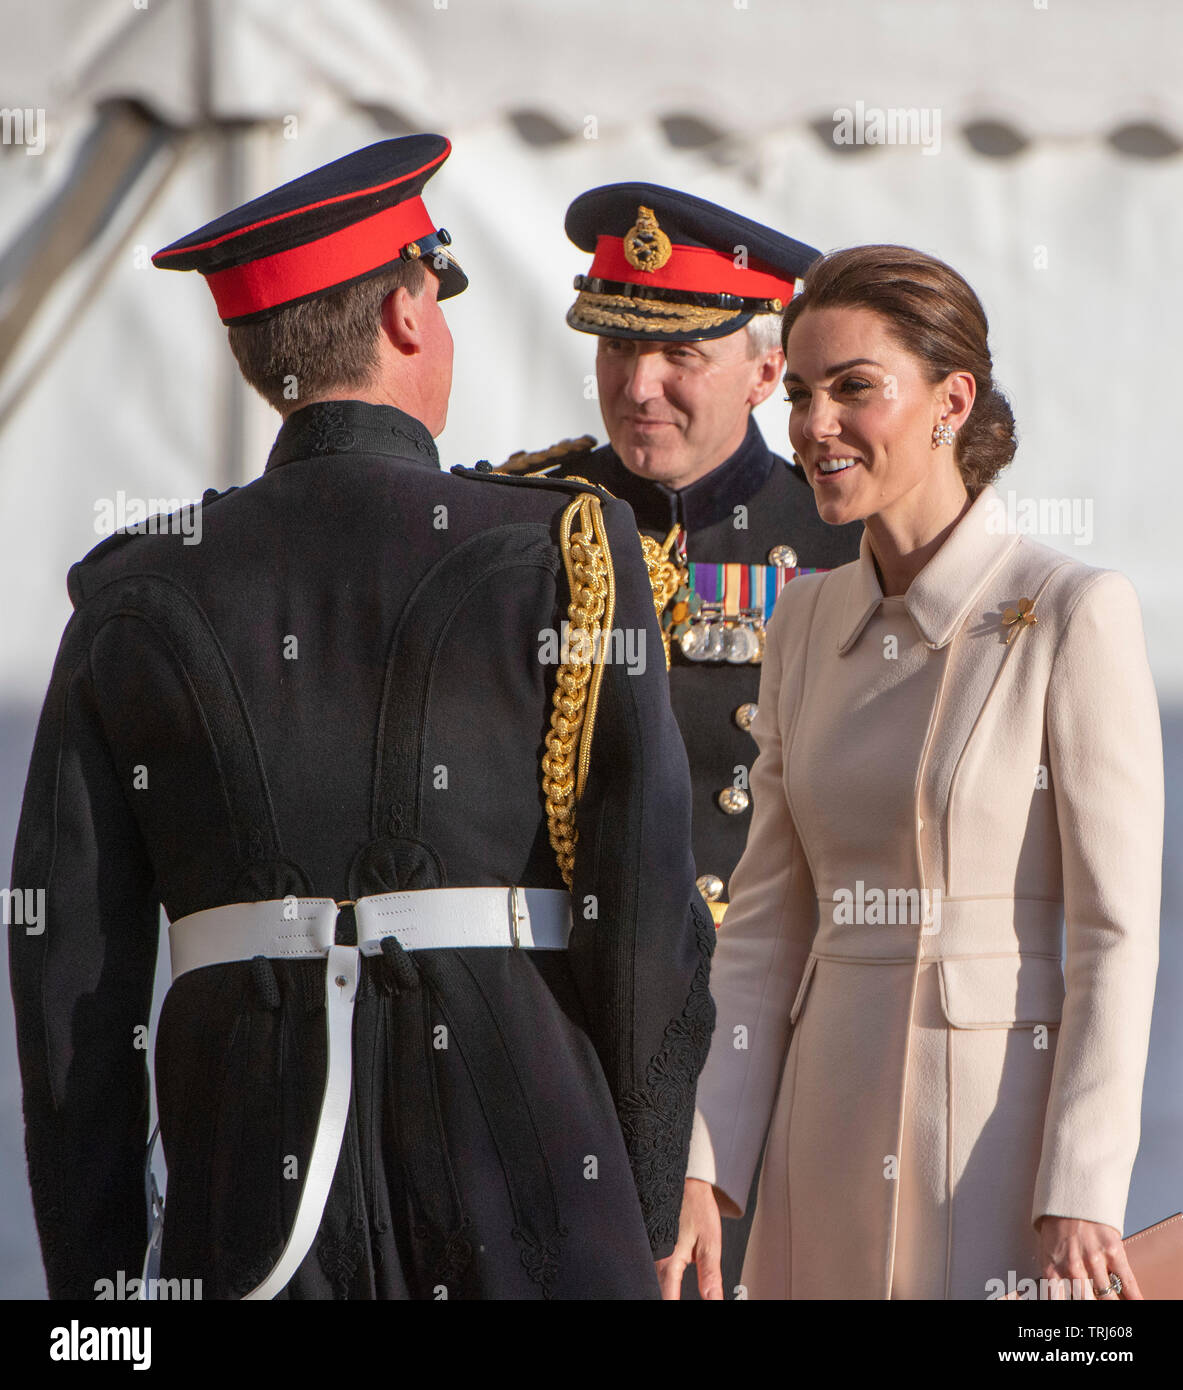 Horse Guards Parade, London, UK. 6th June 2019. HRH The Duchess of Cambridge attends the annual British Army Household Division evening military music spectacular, Beating Retreat. Credit: Malcolm Park/Alamy Live News. Stock Photo